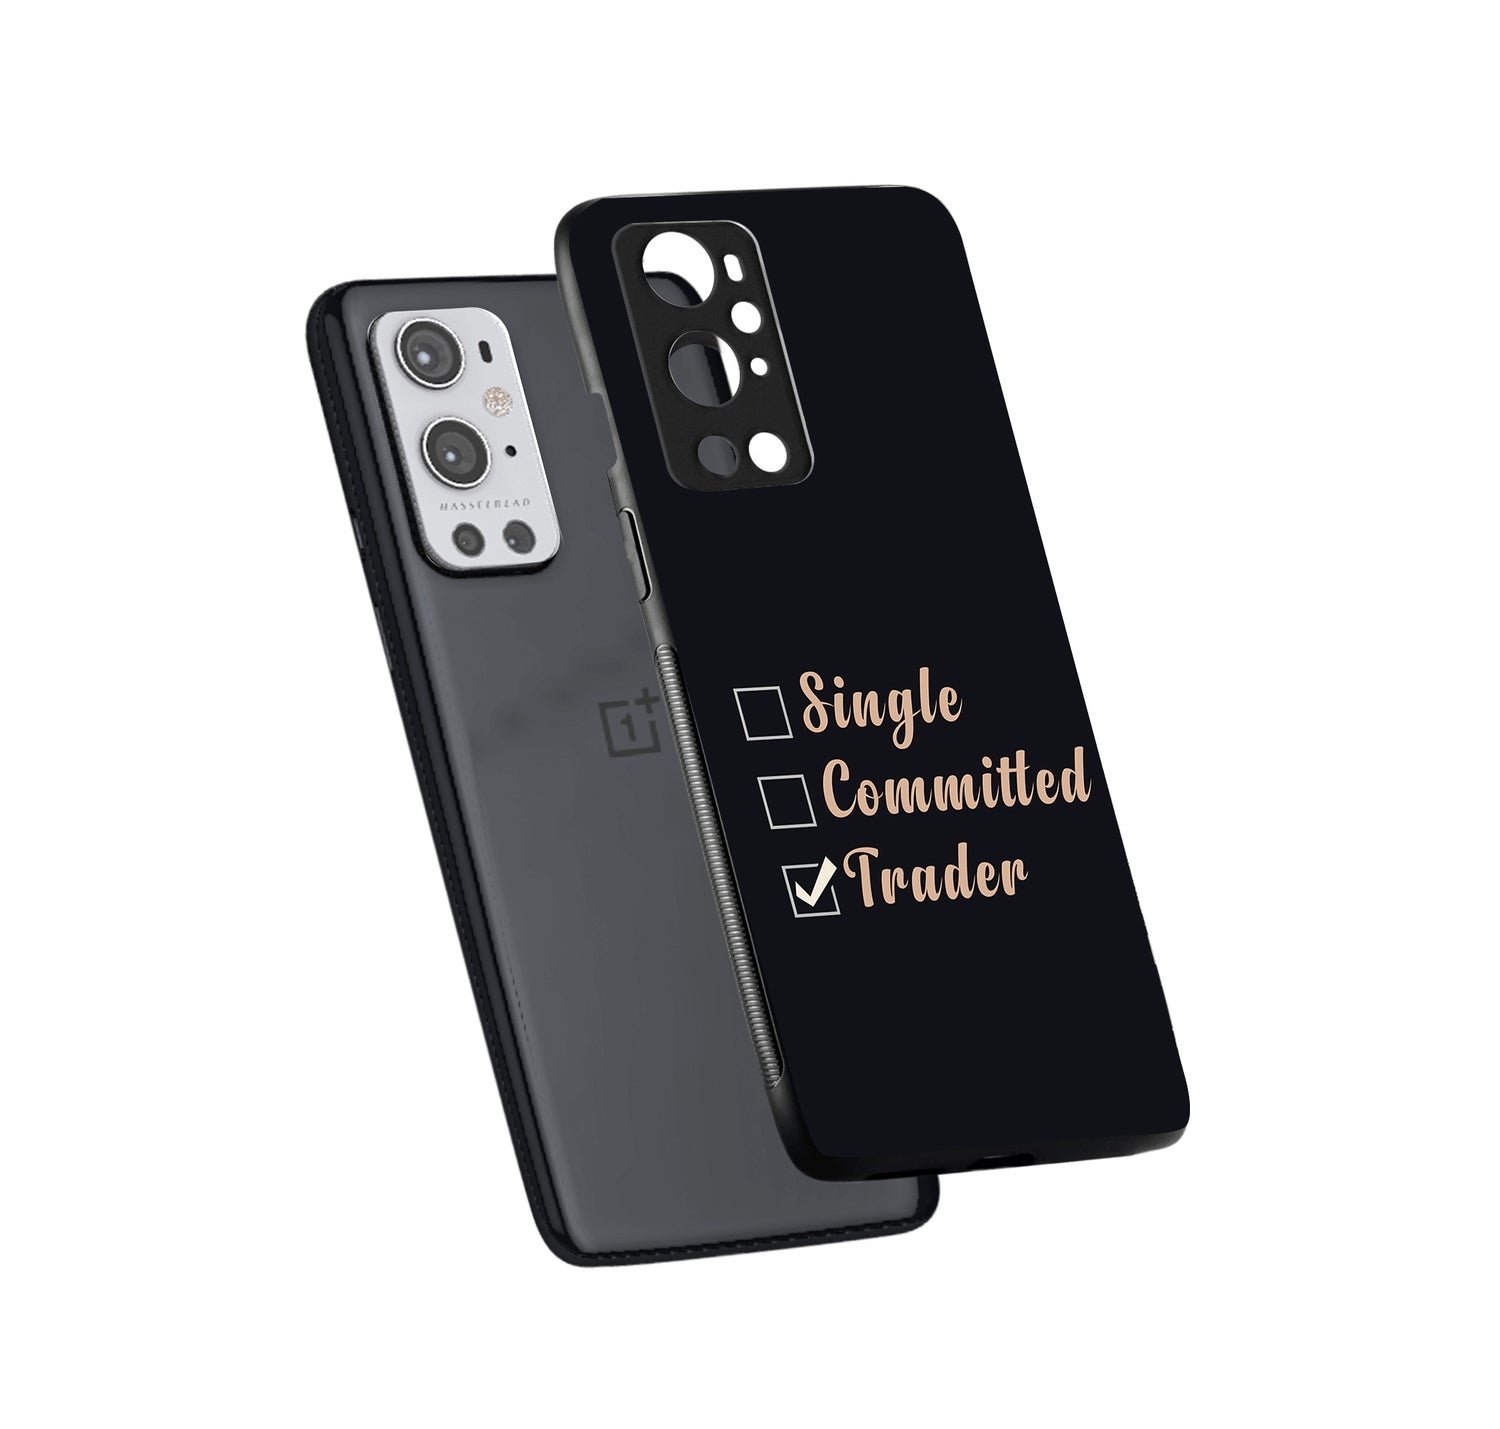 Single, Commited, Trader Trading Oneplus 9 Pro Back Case